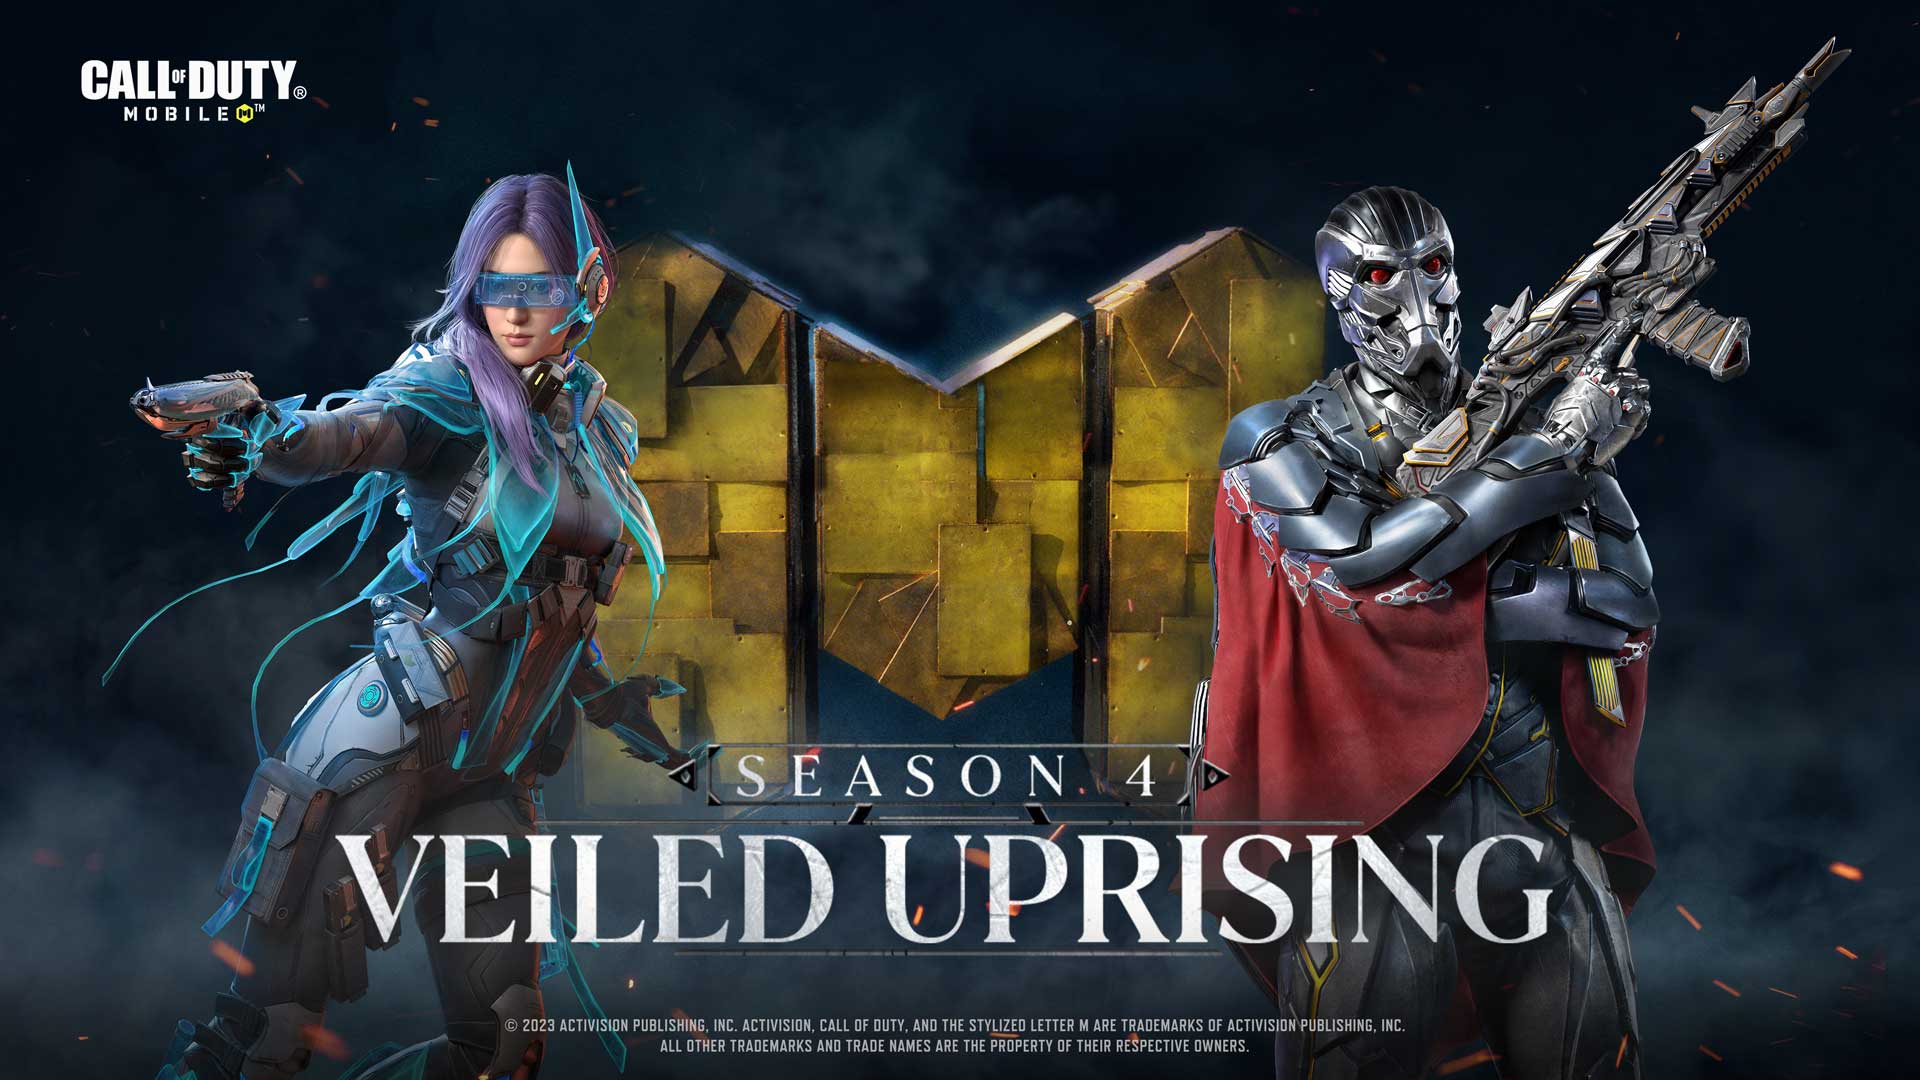 WORLDS COLLIDE IN CALL OF DUTY®: MOBILE SEASON 4 — VEILED UPRISING